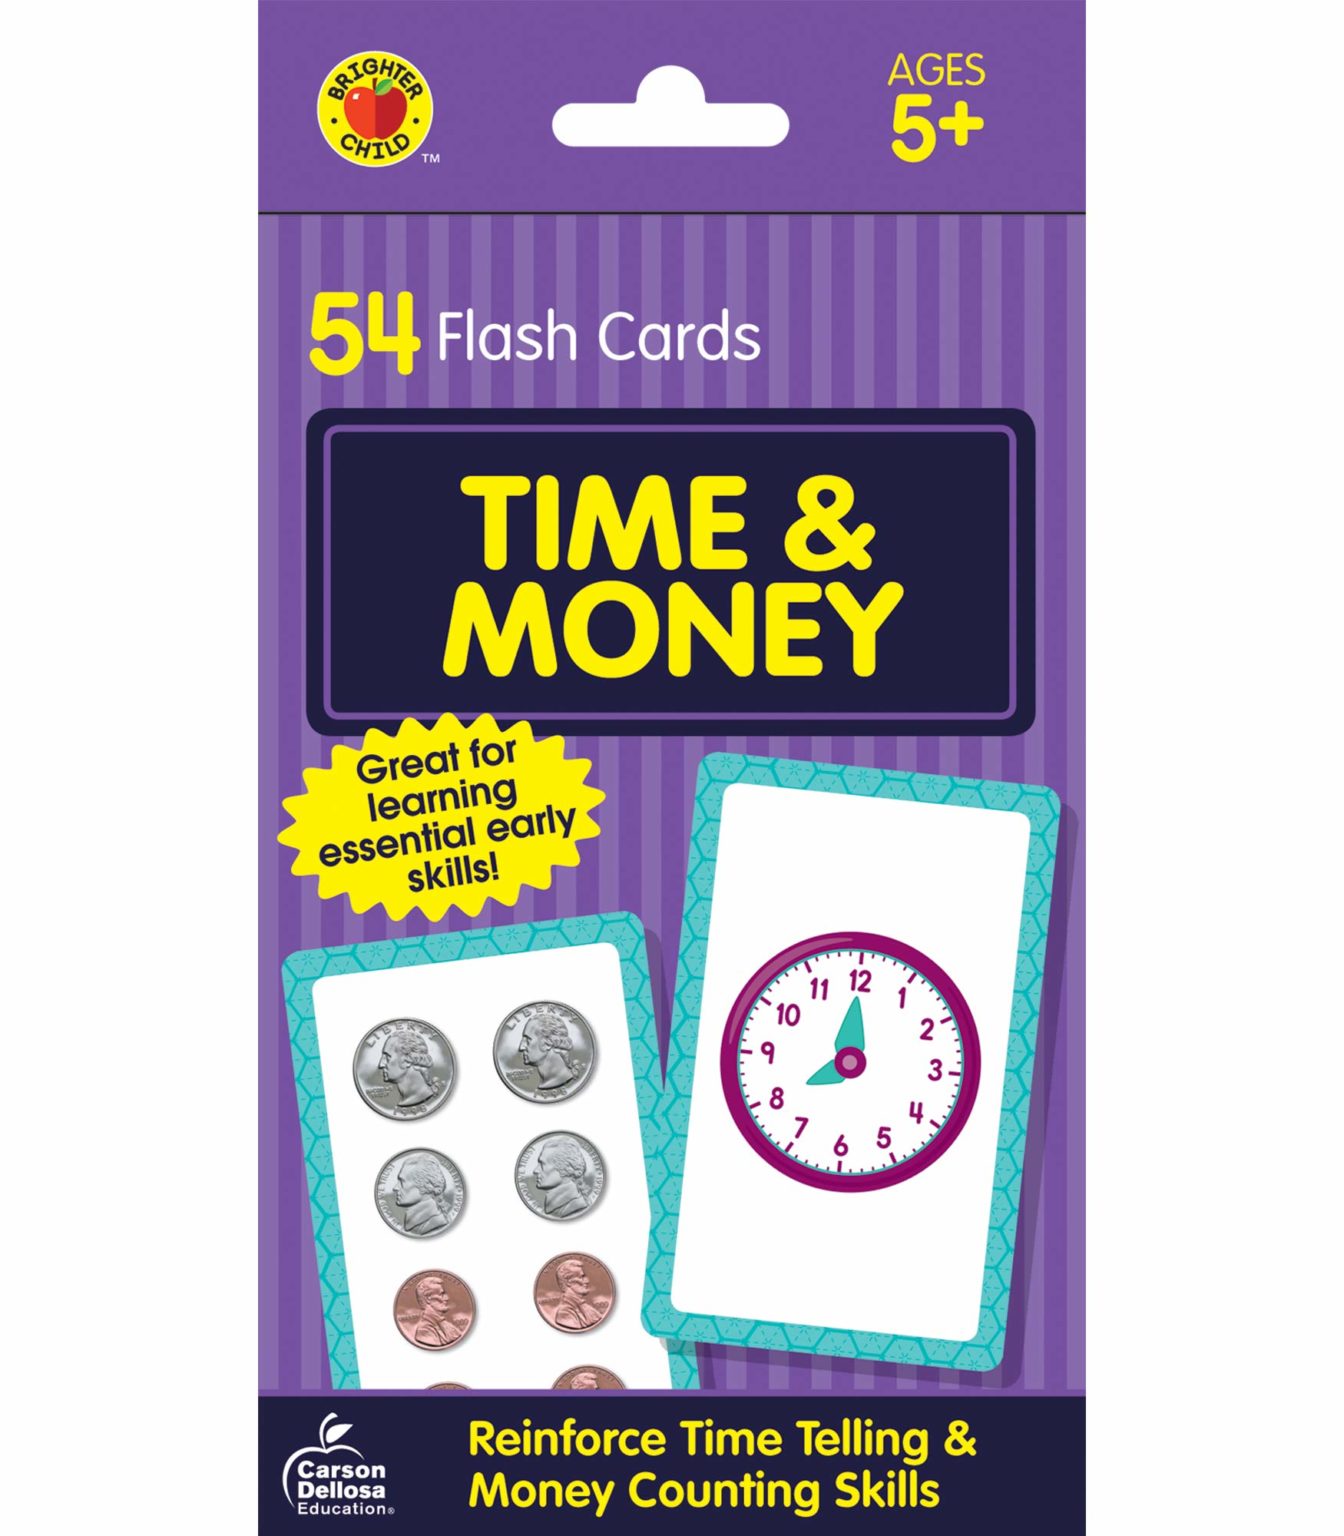 time-and-money-flash-cards-2-99-become-a-coupon-queen